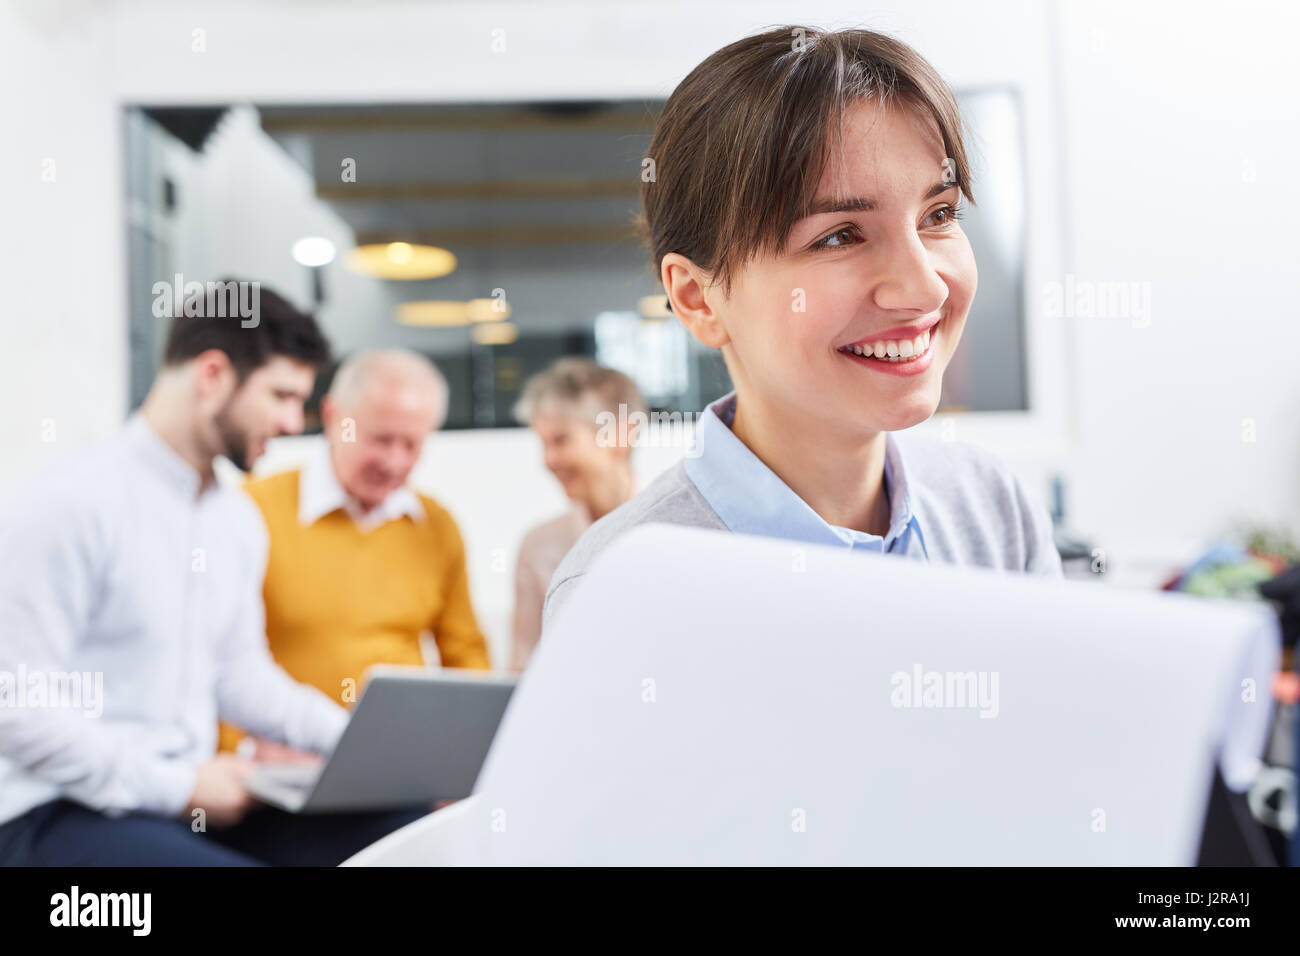 Young woman in job application interview for business apprenticeship Stock Photo